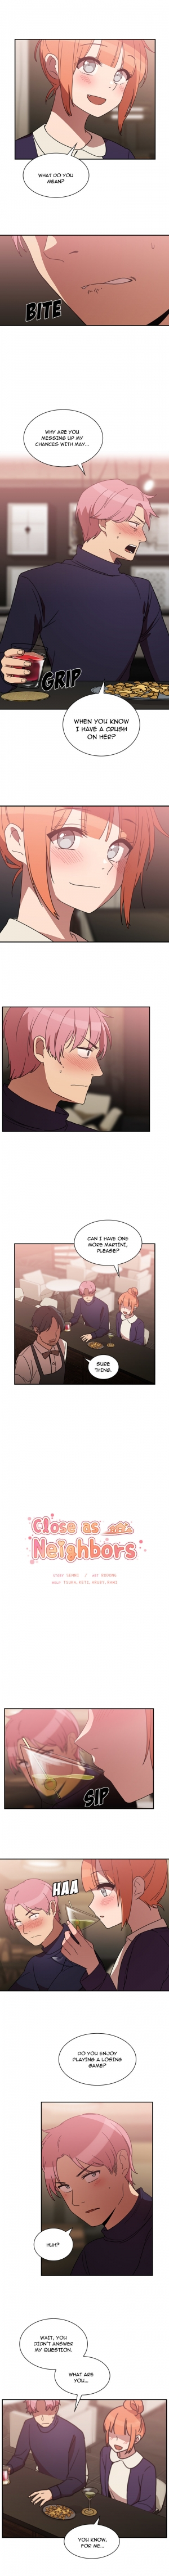 [Semni] Close as Neighbors (Ch.1-43) [English] [Ongoing] - Page 227